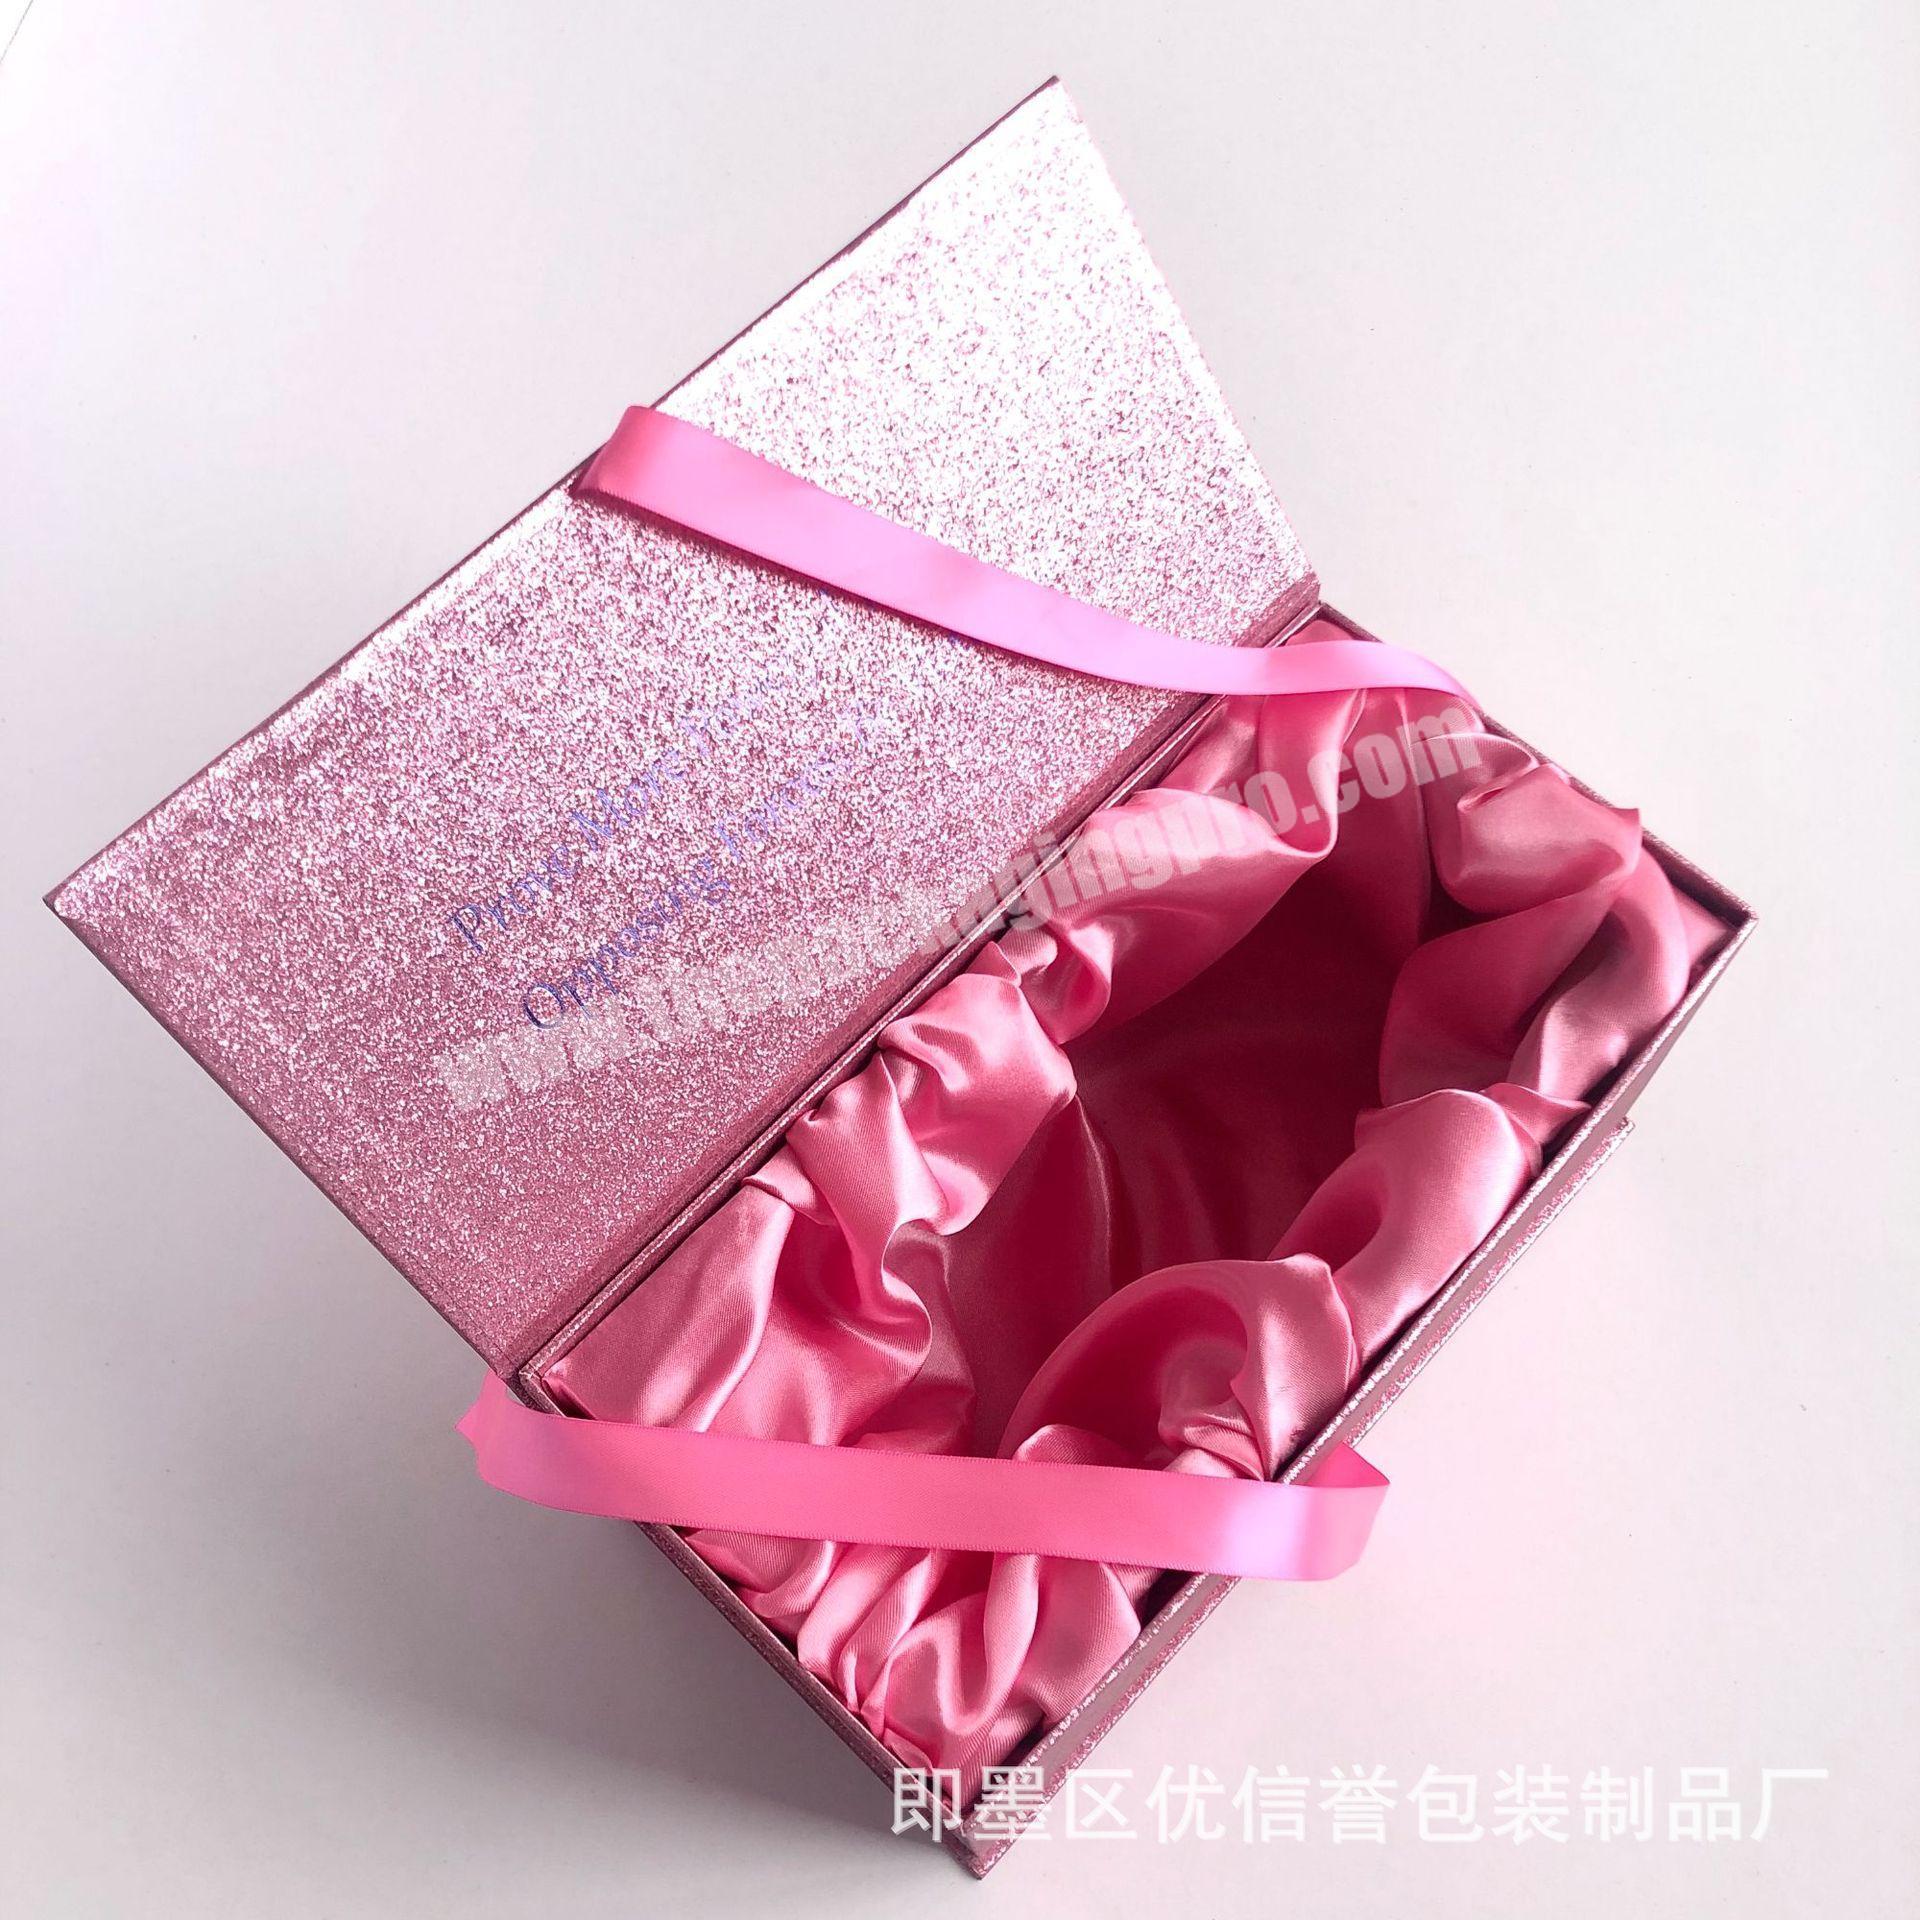 New arrival pink color special paper material customized logo cosmetic wig packaging boxes mask essential oil gift box